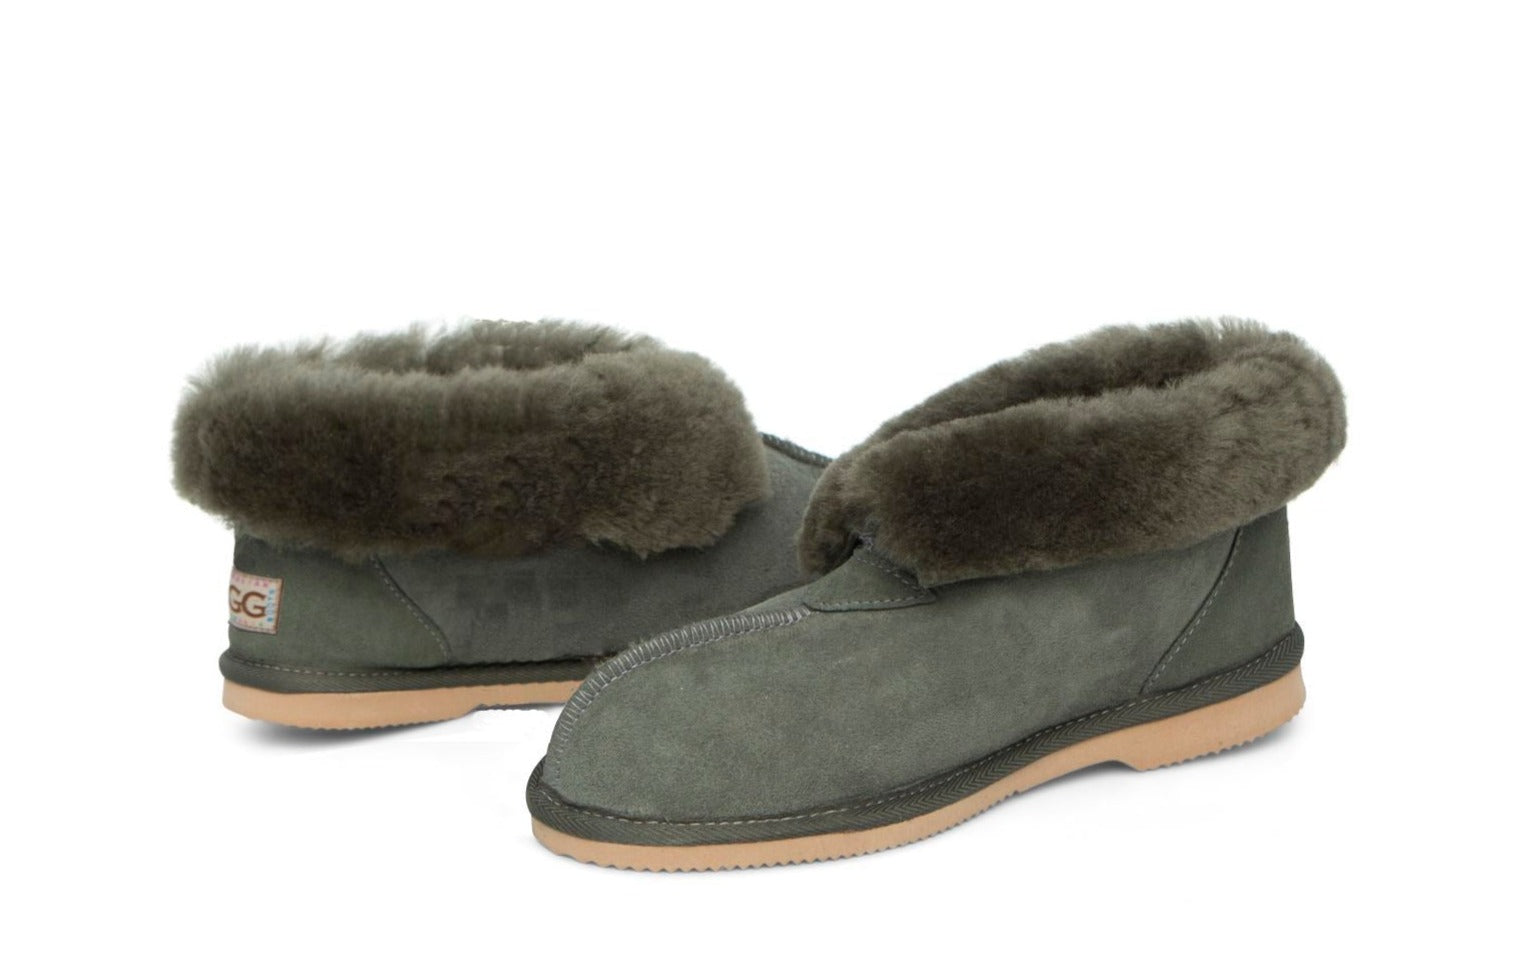 Kid's Ugg Slippers, with sheepskin rolled out at the top in camo